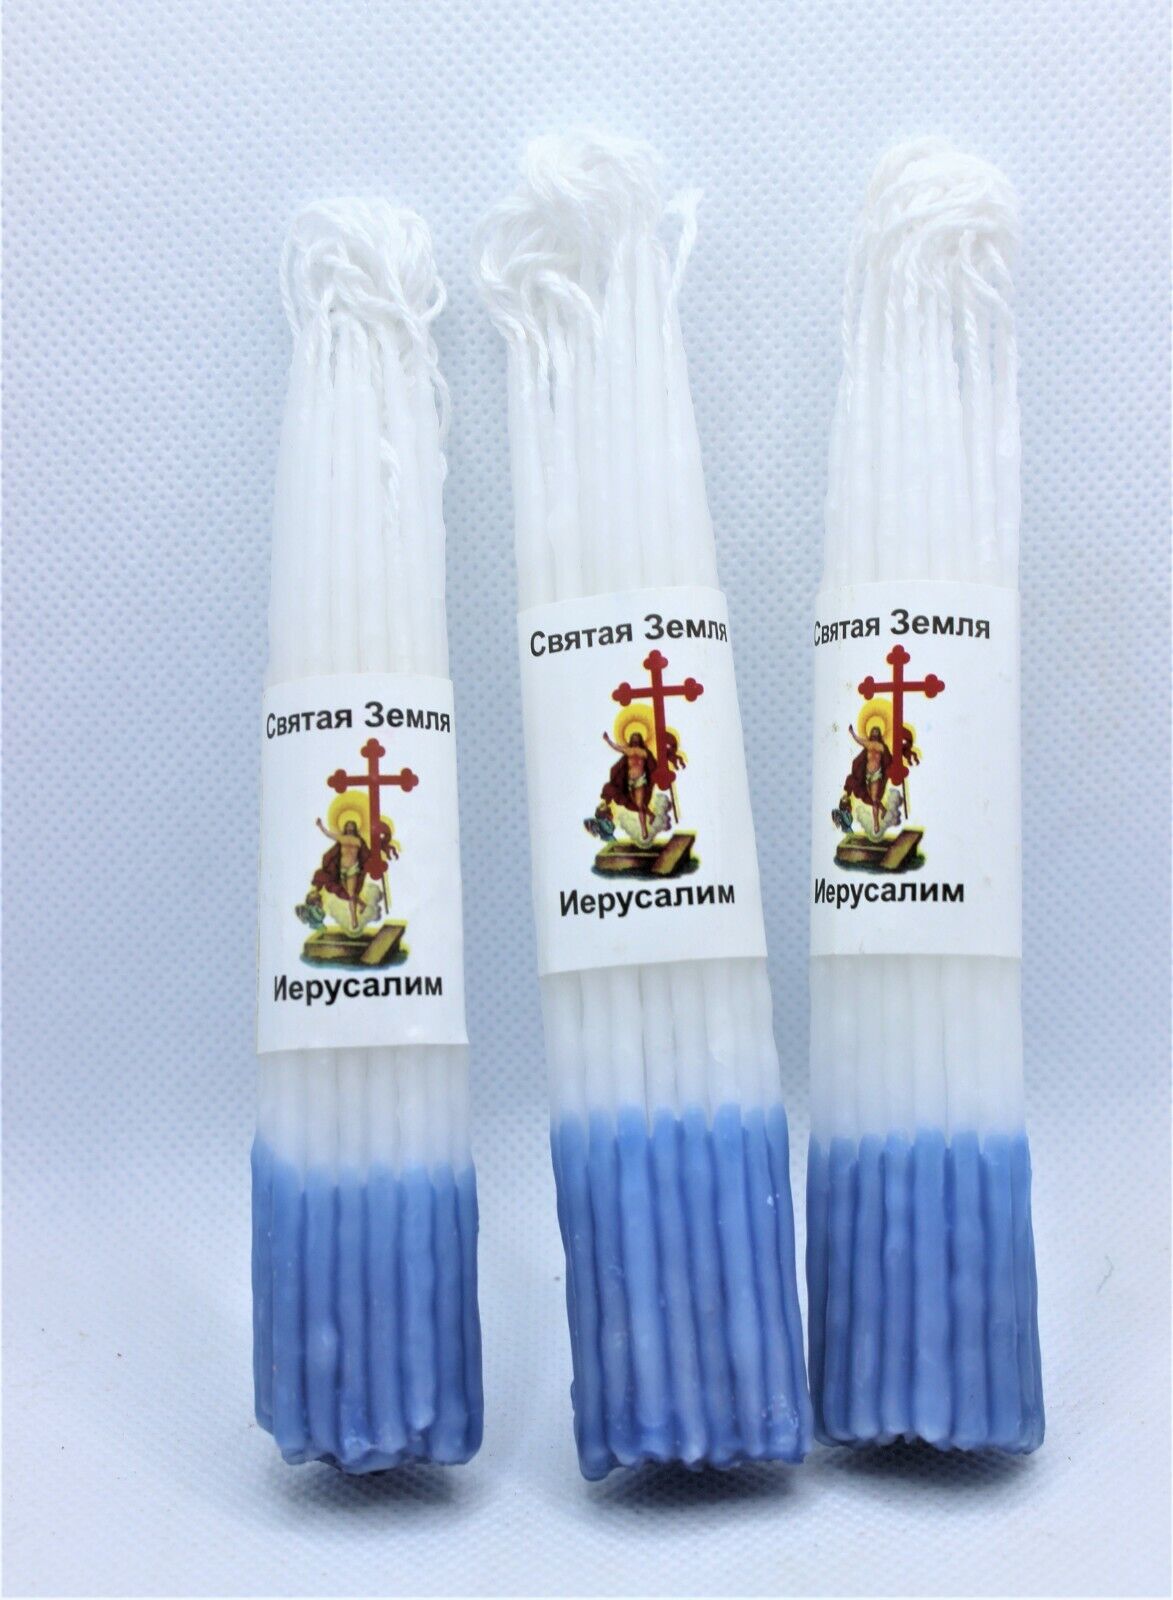 33 small candle Easter candle size12cm each 3 bundles in1 package from jerusalem